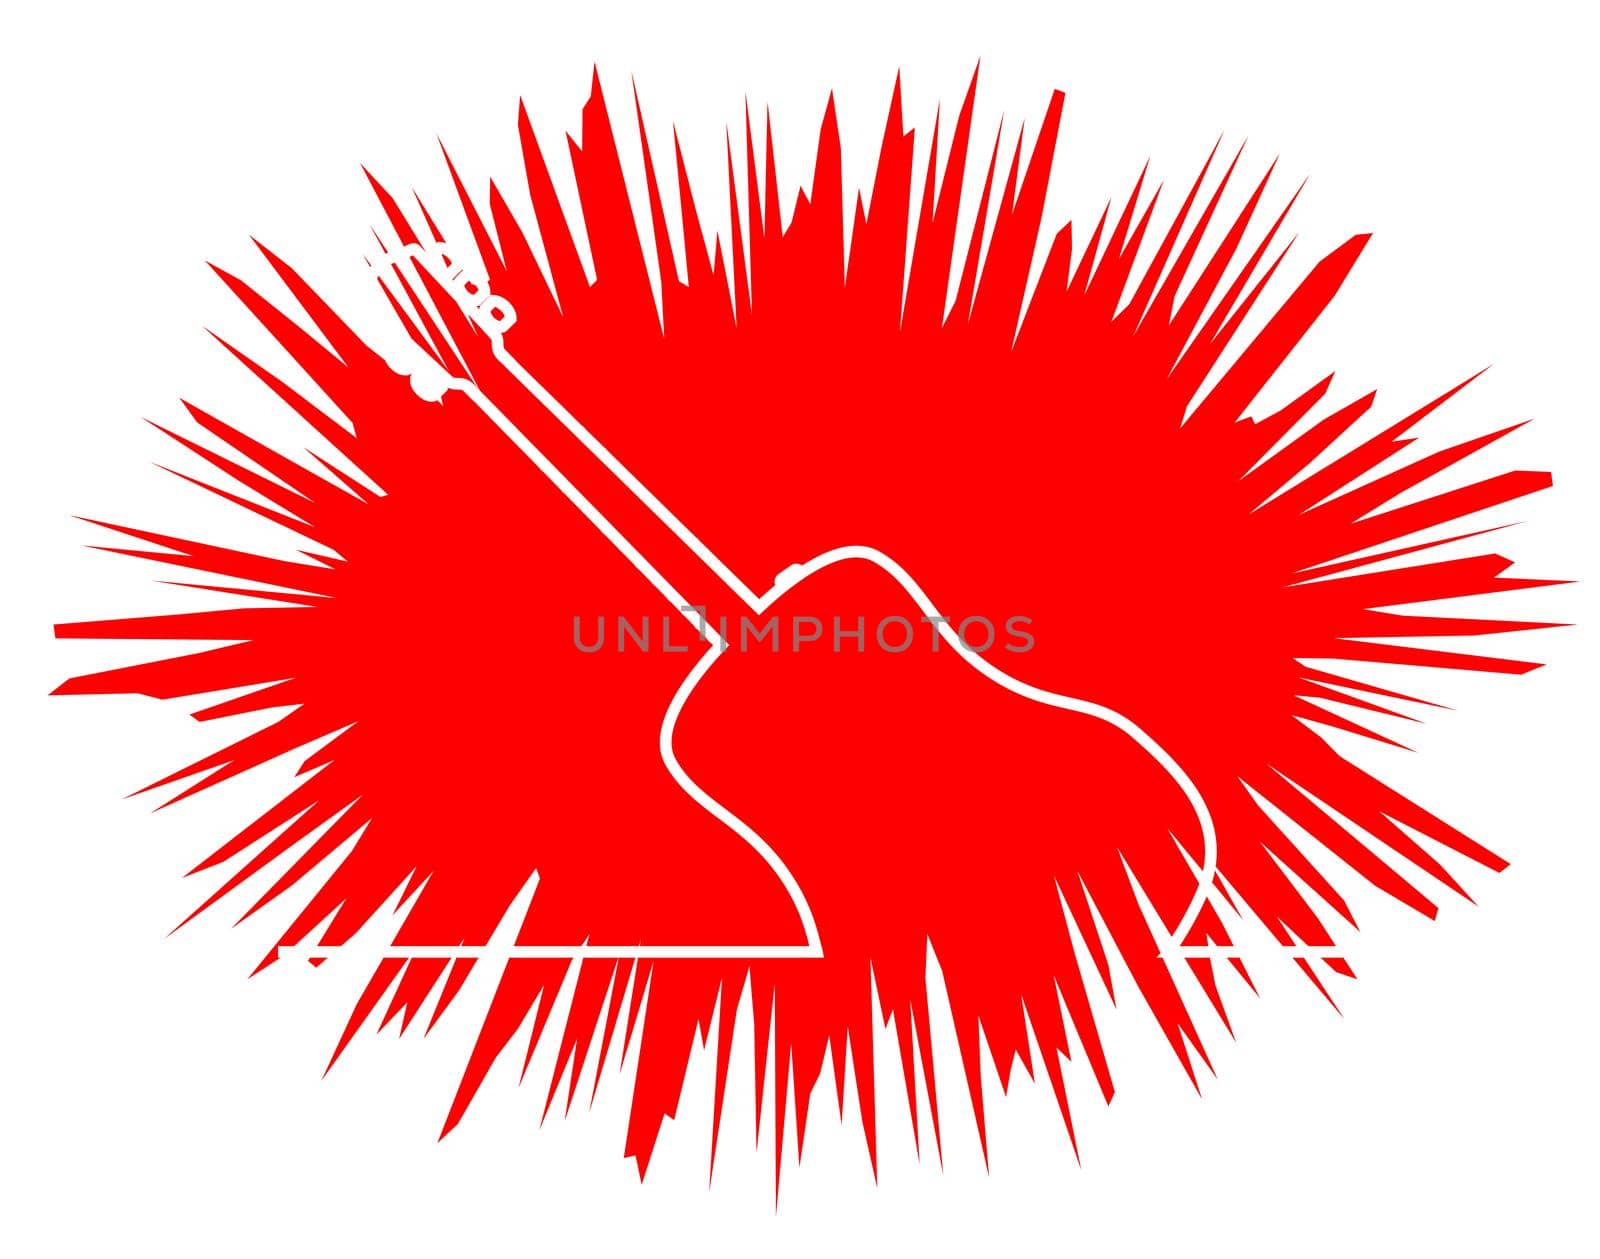 A acoustic guitar in a continuous white line over a red exploive background